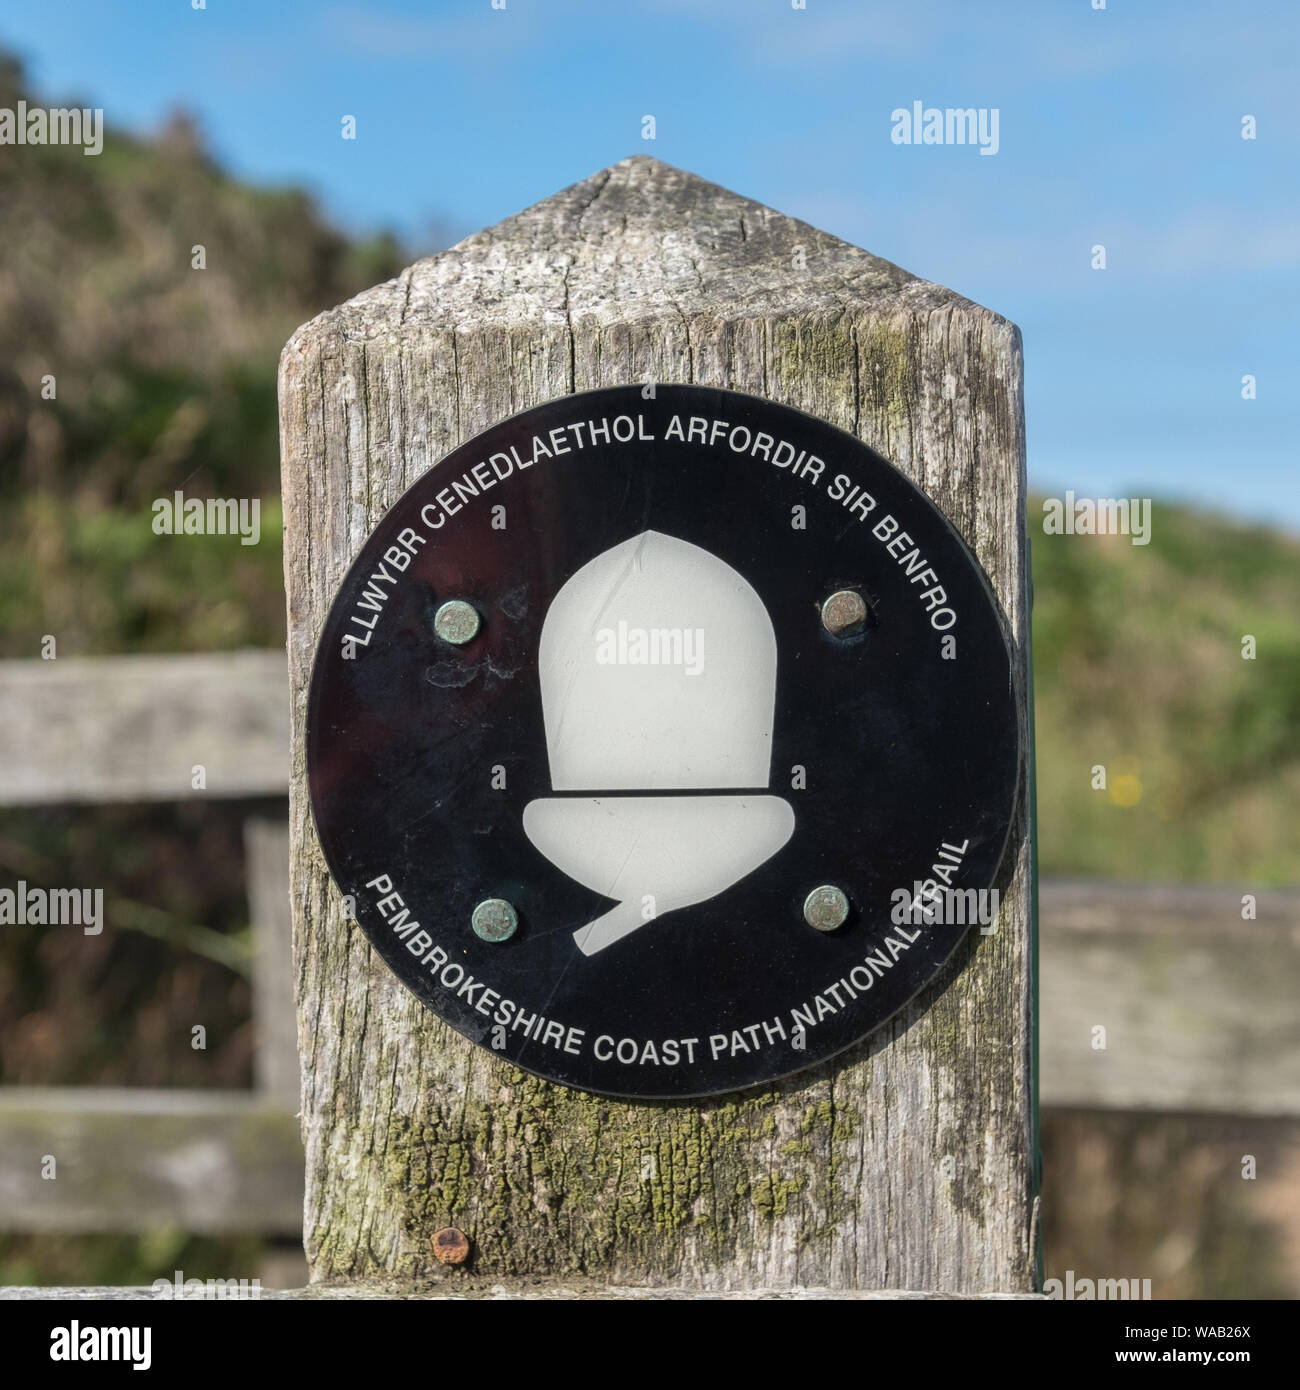 The official acorn symbol for national hiking trails in England and Wales. This is one on the Pembrokeshire Coast Path National Trail in Wales. Stock Photo